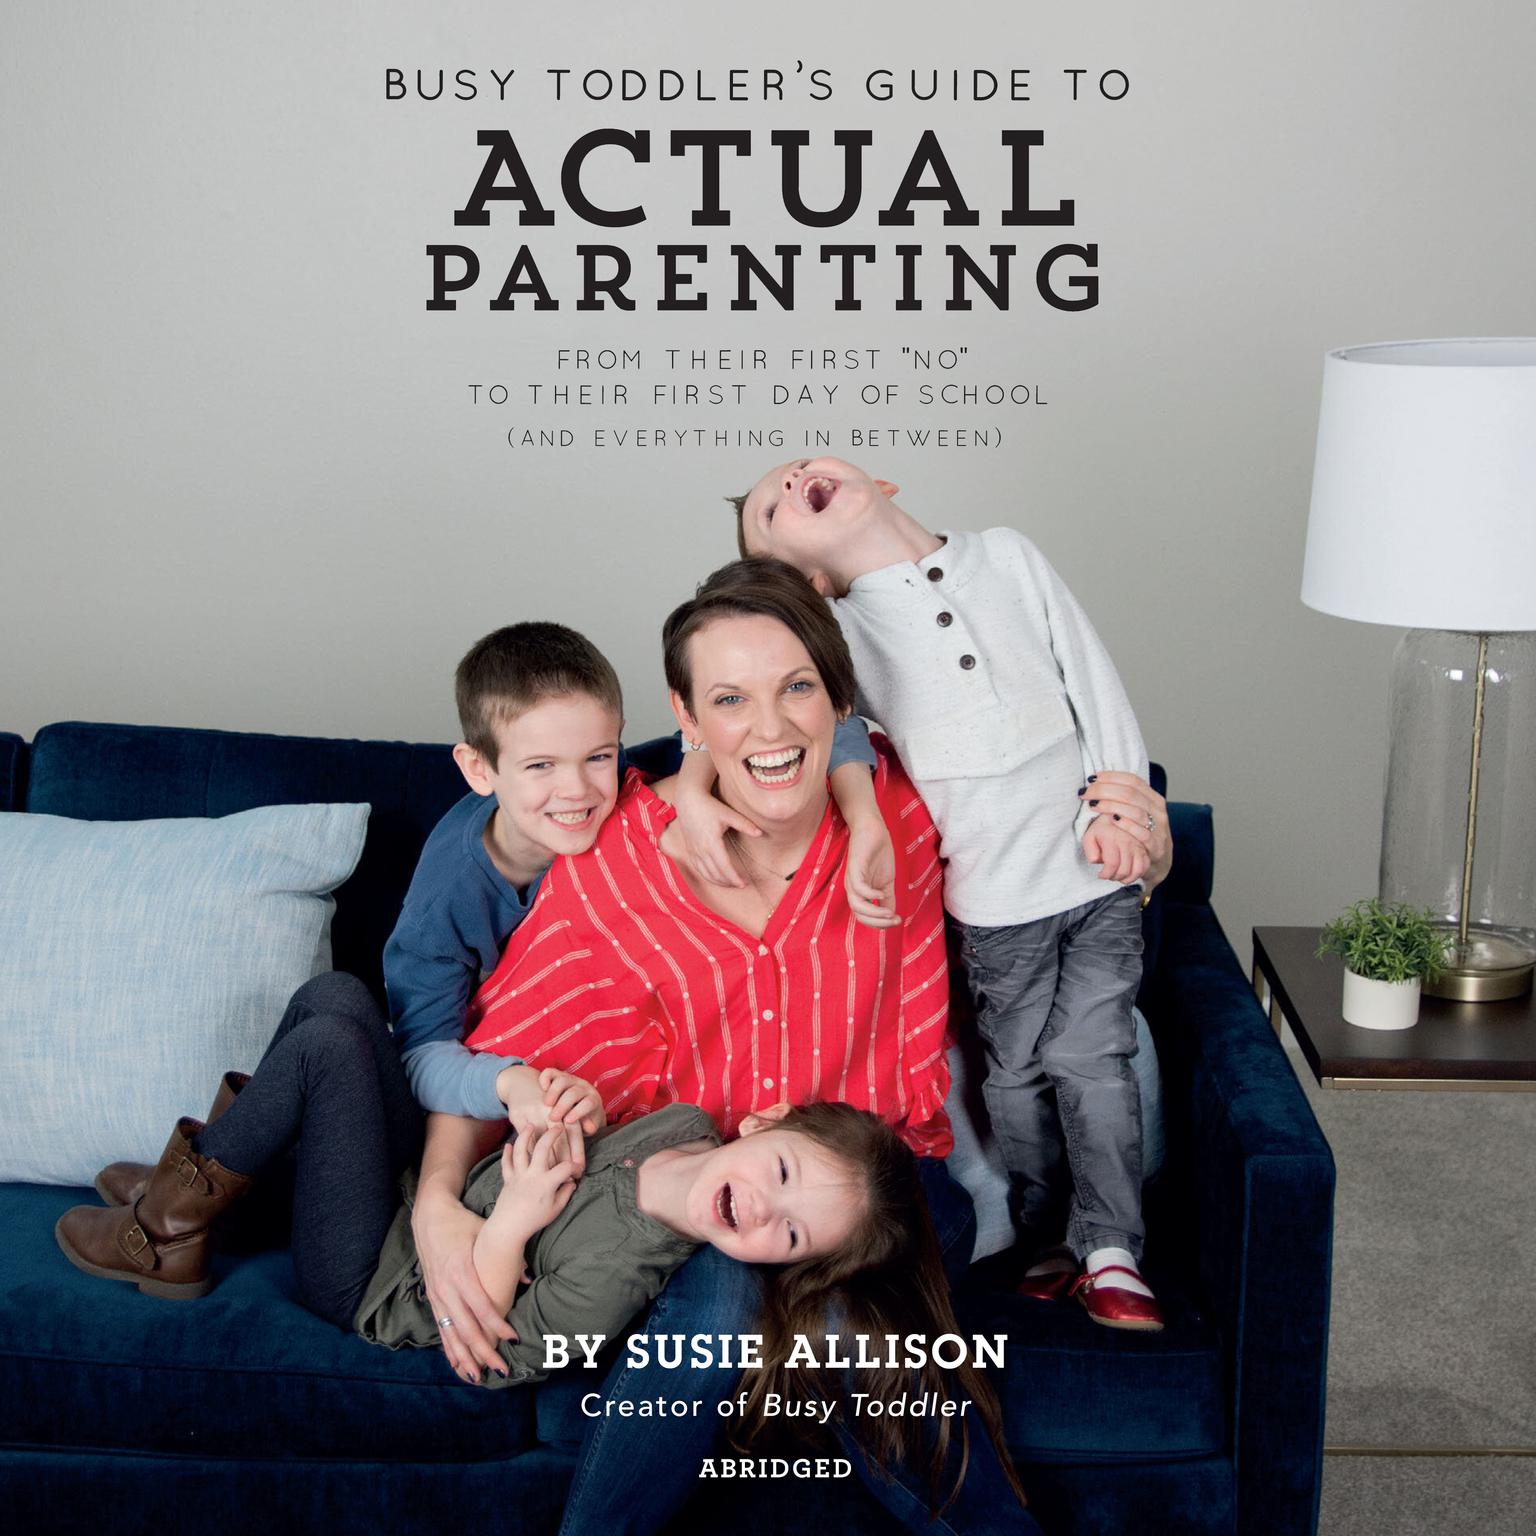 Busy Toddlers Guide to Actual Parenting (Abridged): From Their First No to Their First Day of School (and Everything In Between) Audiobook, by Susie Allison